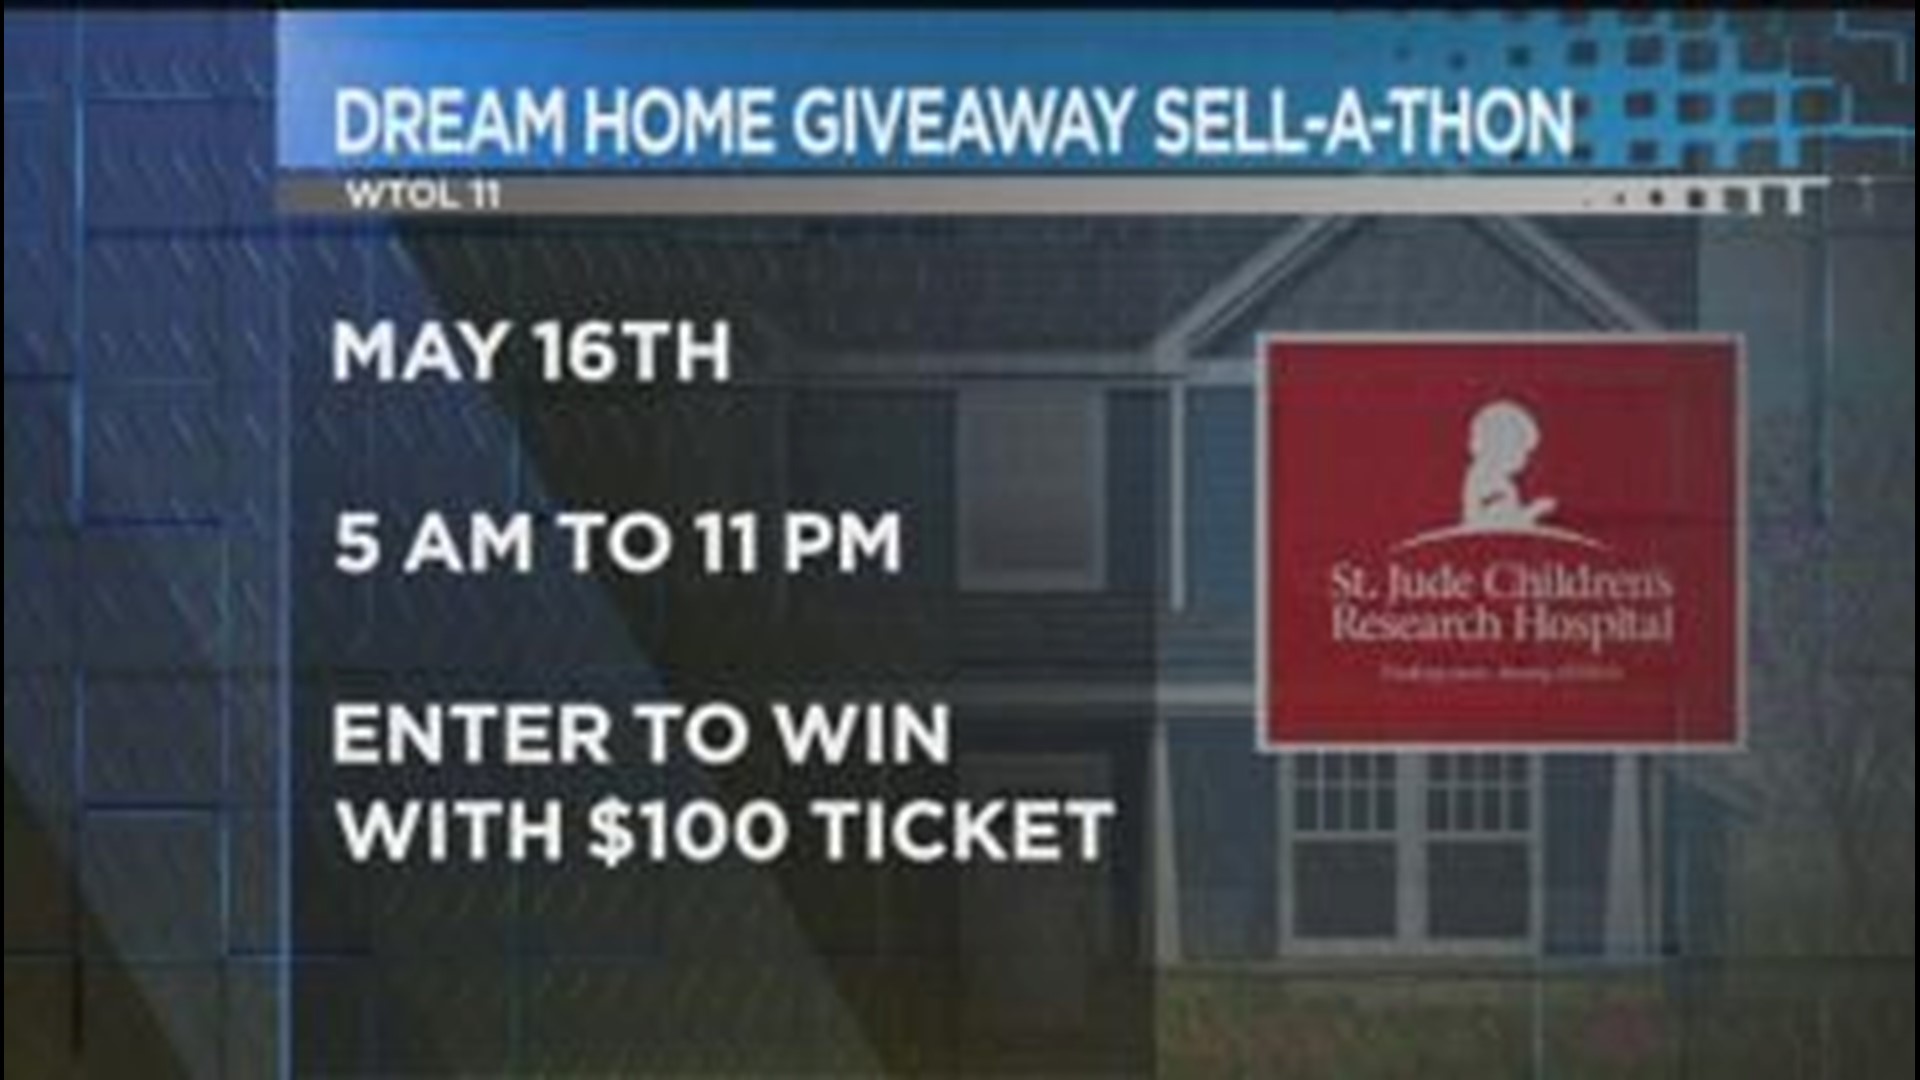 Reserve your ticket to win the St. Jude Dream Home!